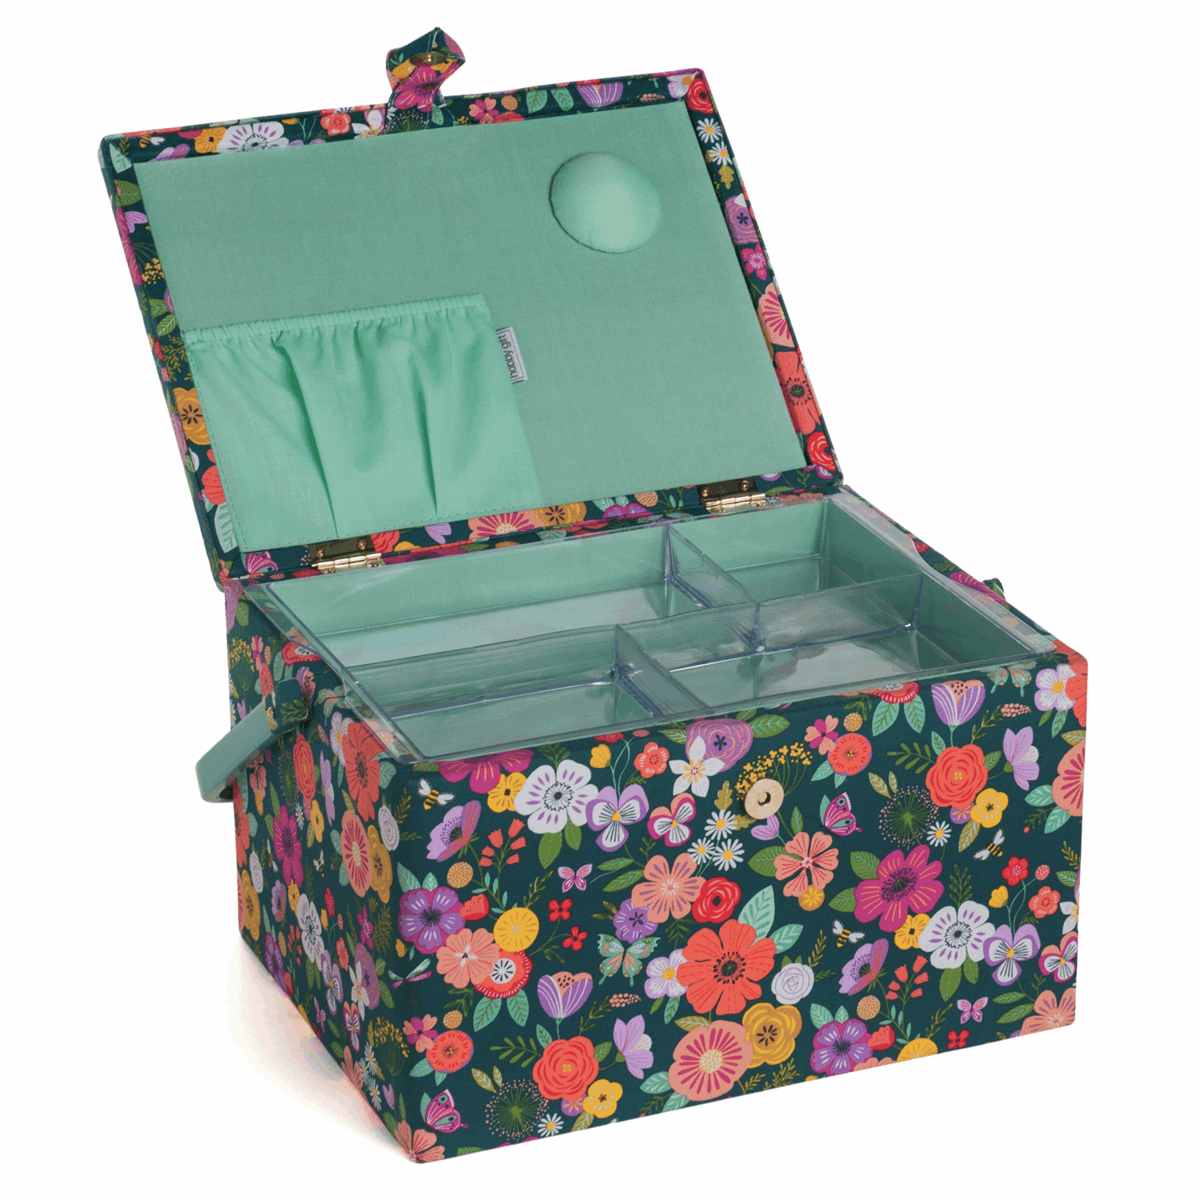 Teal Garden Floral Sewing Box - Large